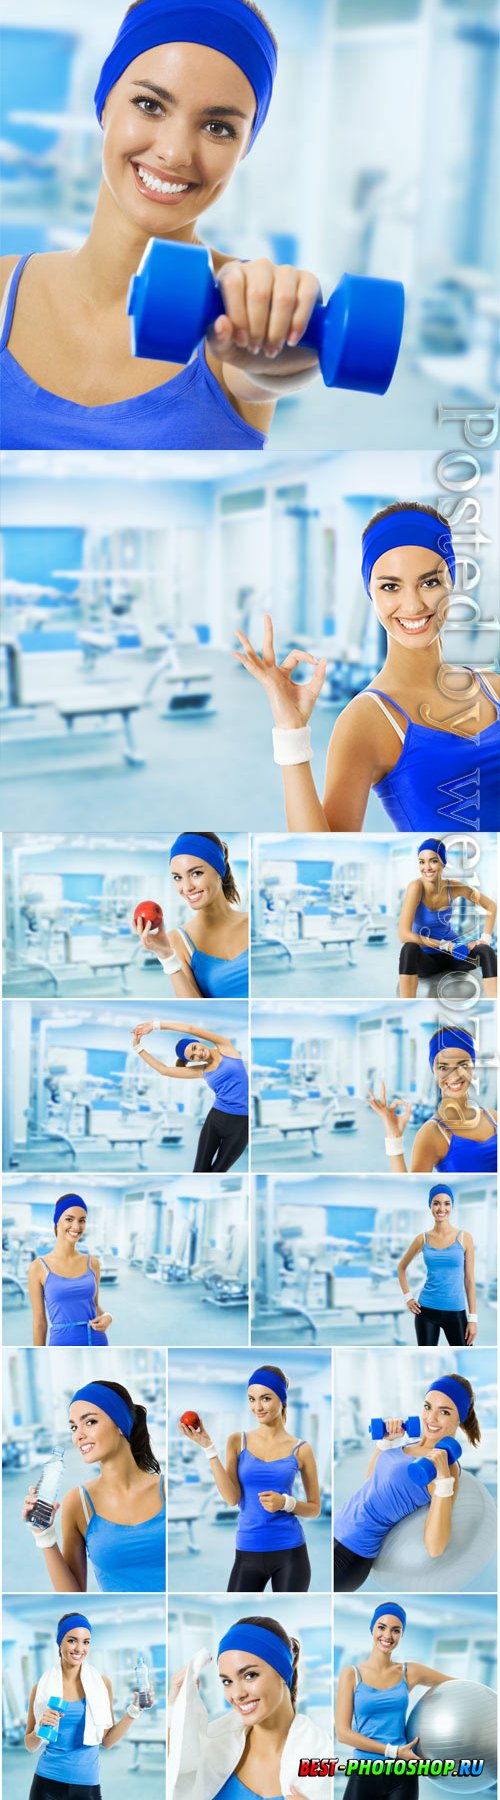 Young girl in gym stock photo